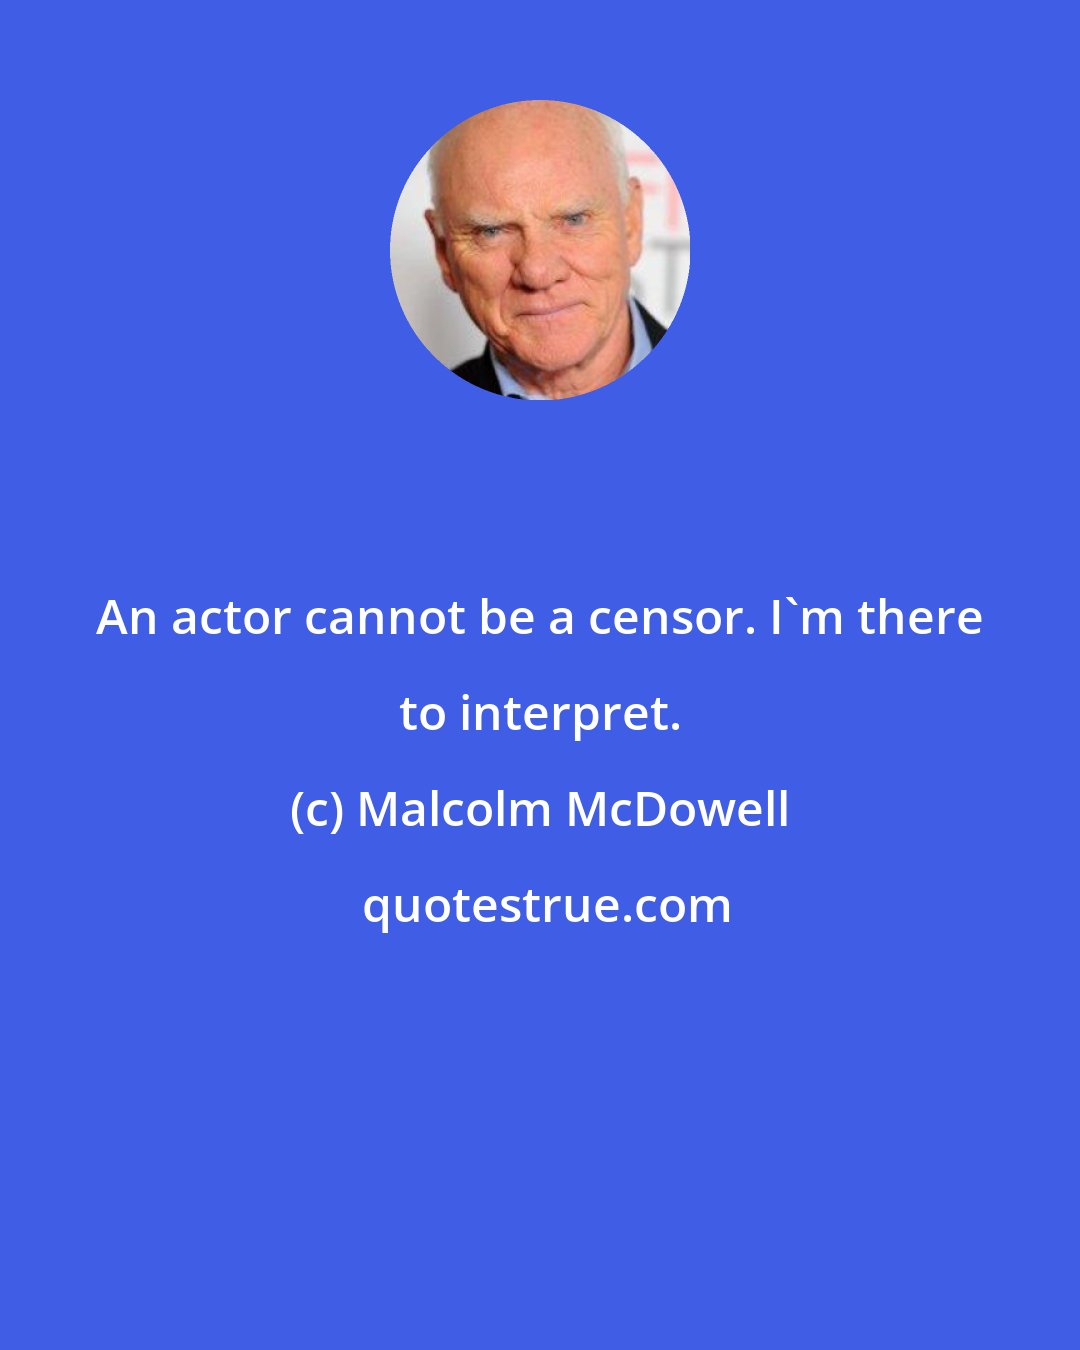 Malcolm McDowell: An actor cannot be a censor. I'm there to interpret.